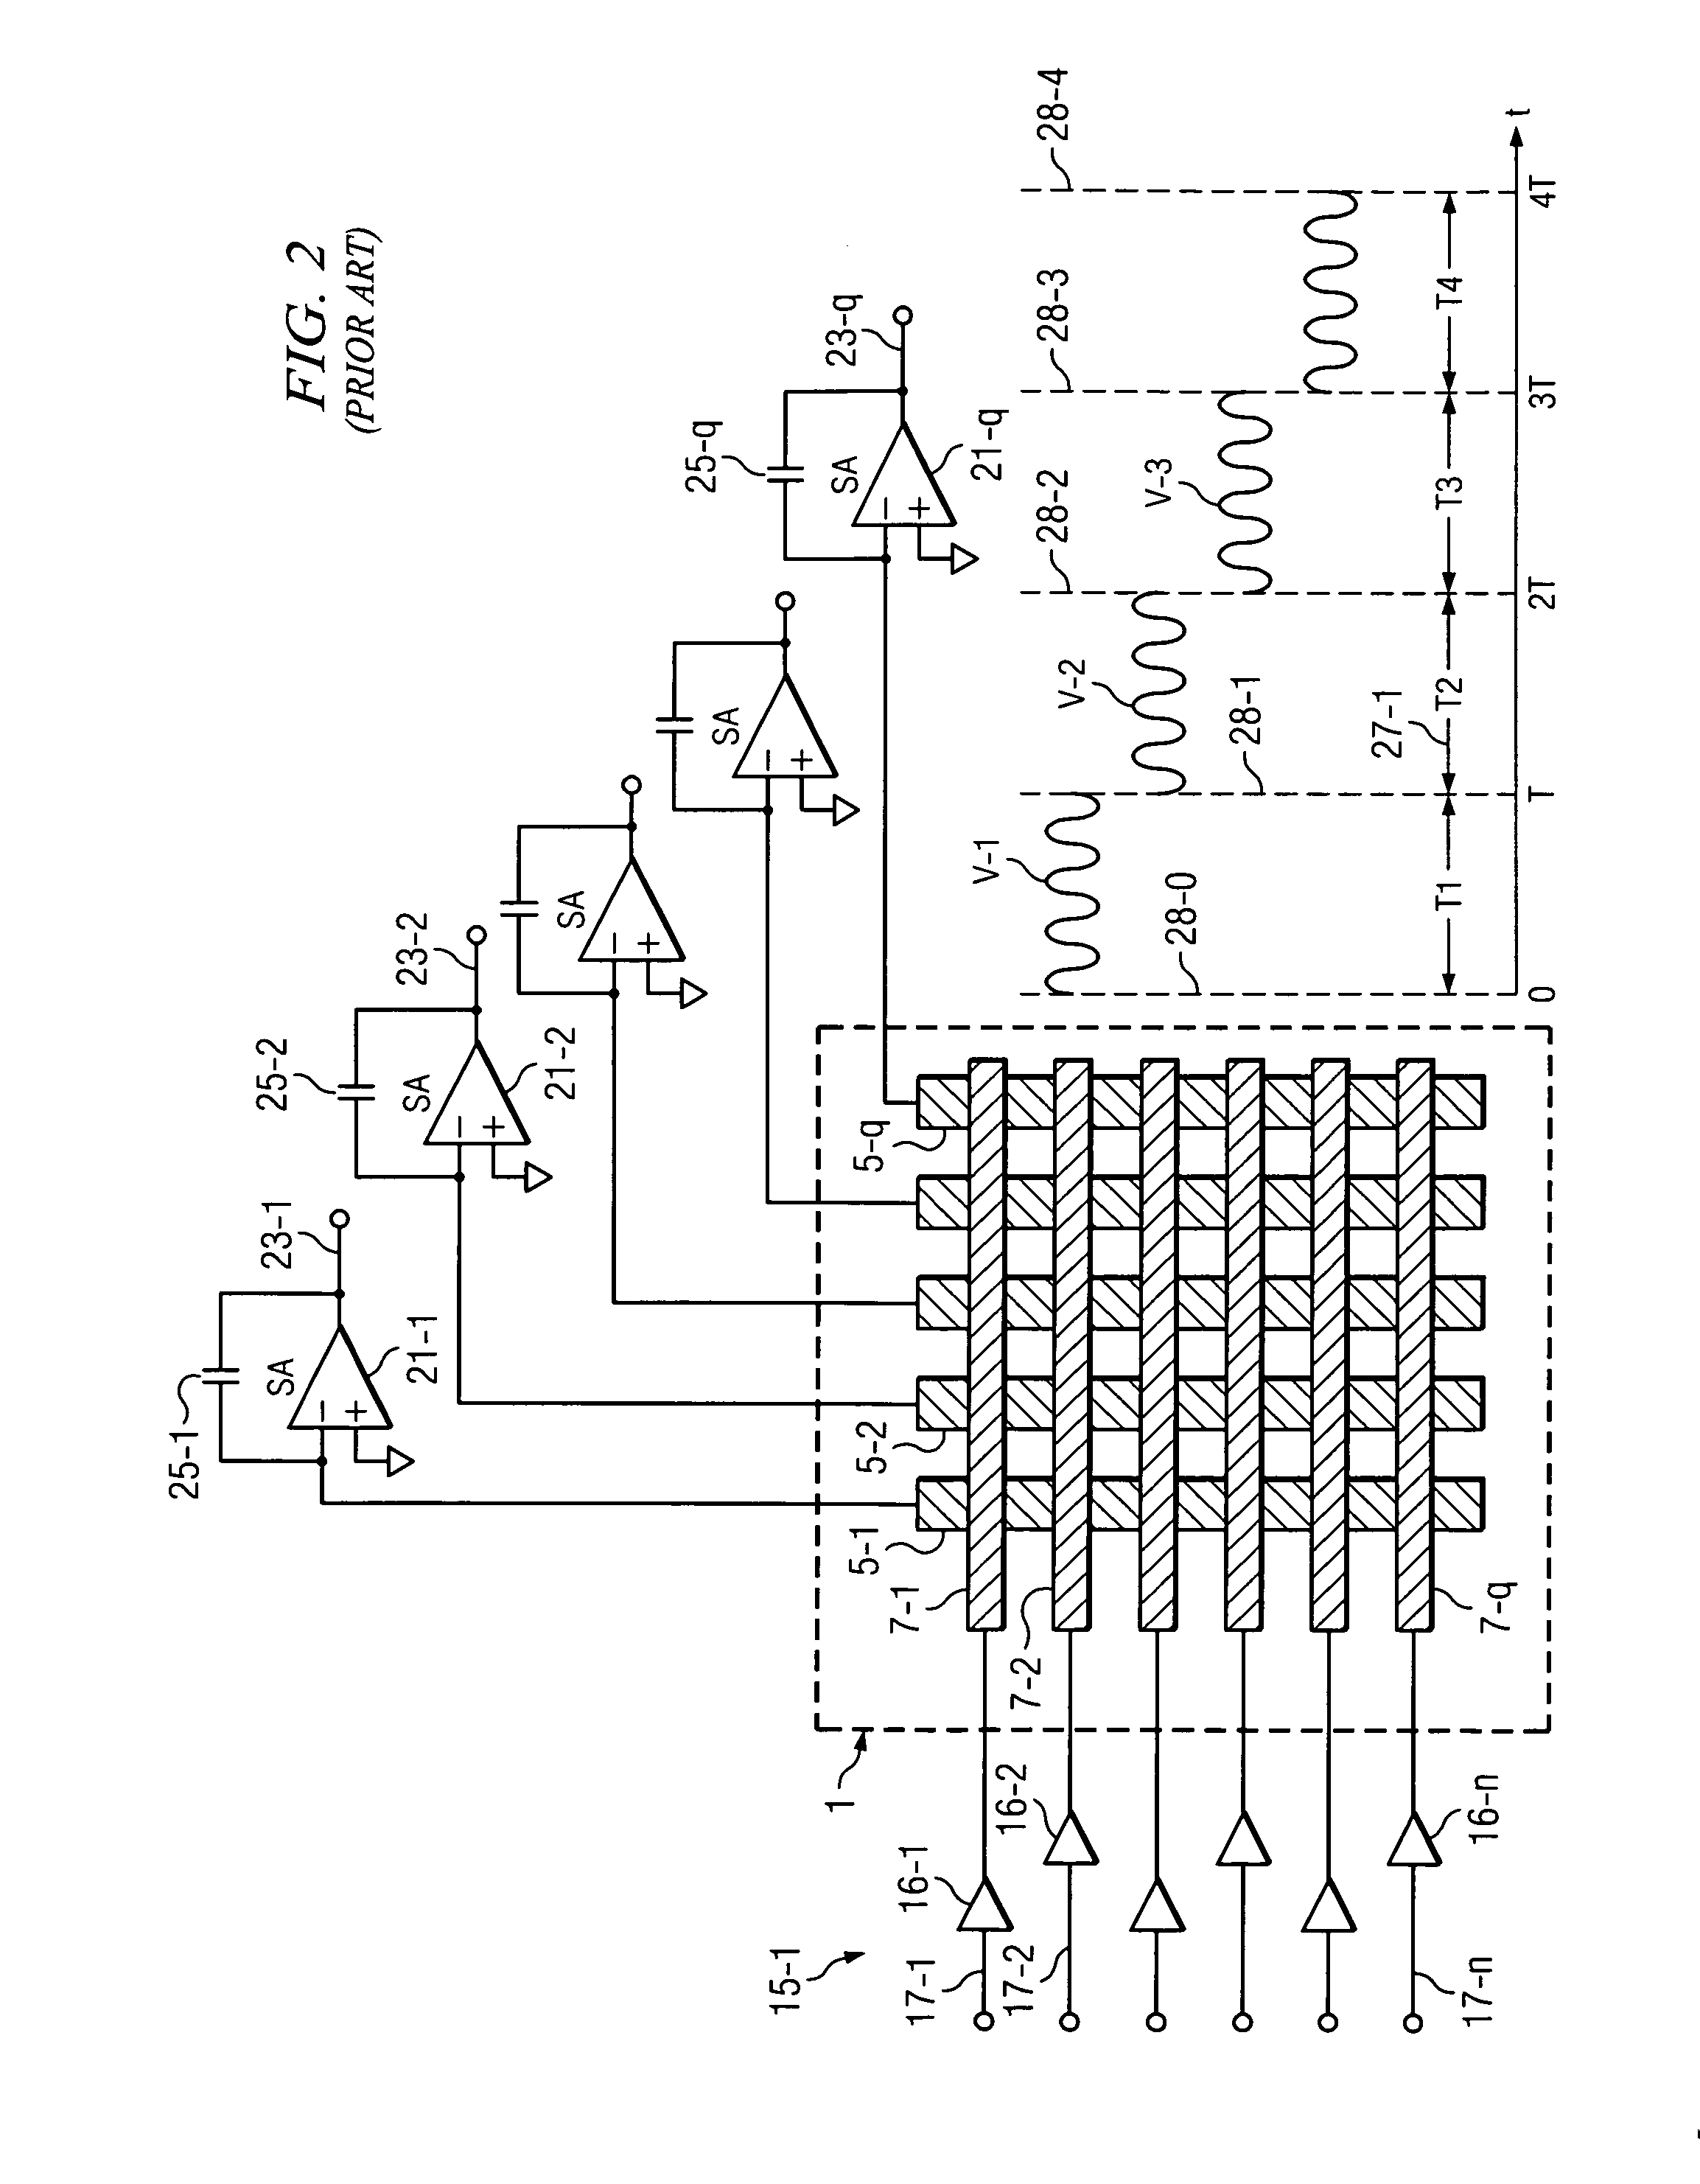 Touch-sensitive interface and method using orthogonal signaling